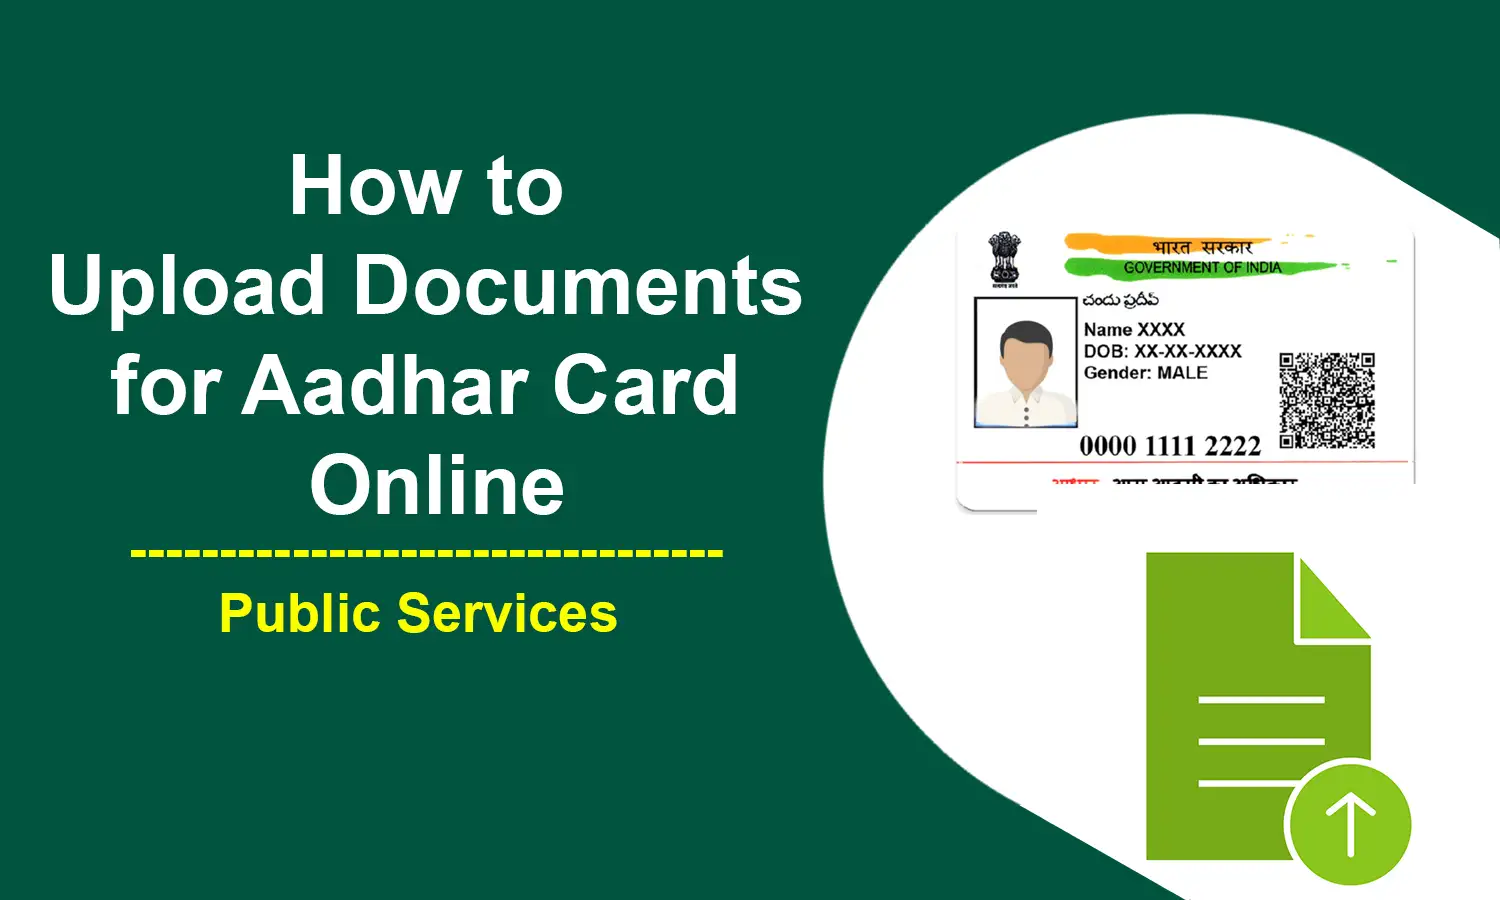 How to Upload Documents for Aadhar Card Online